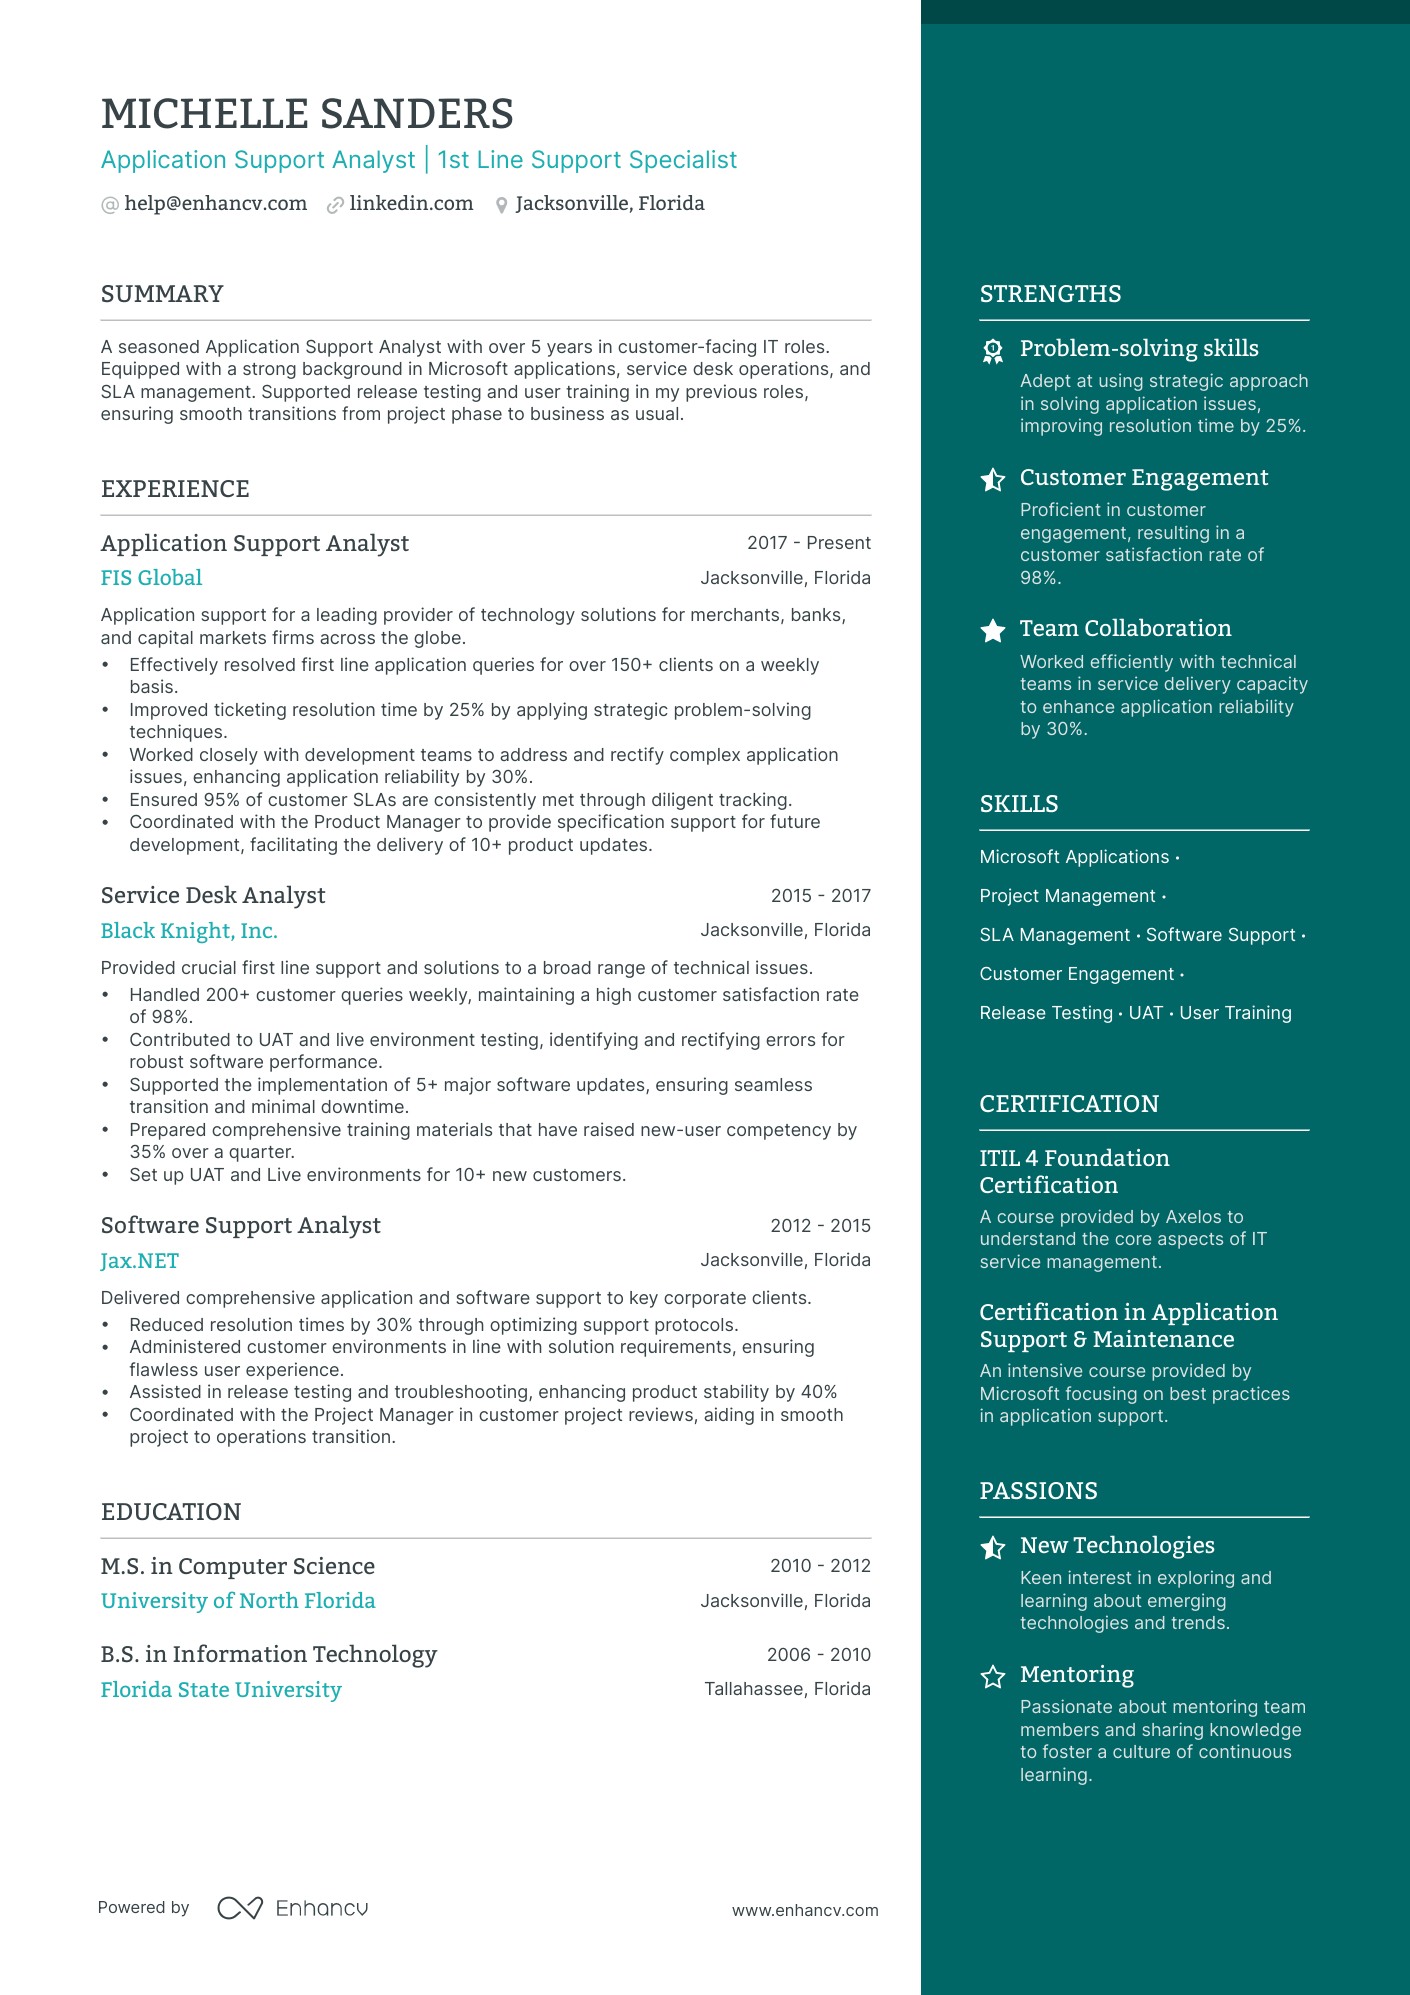 Application Support Analyst resume example